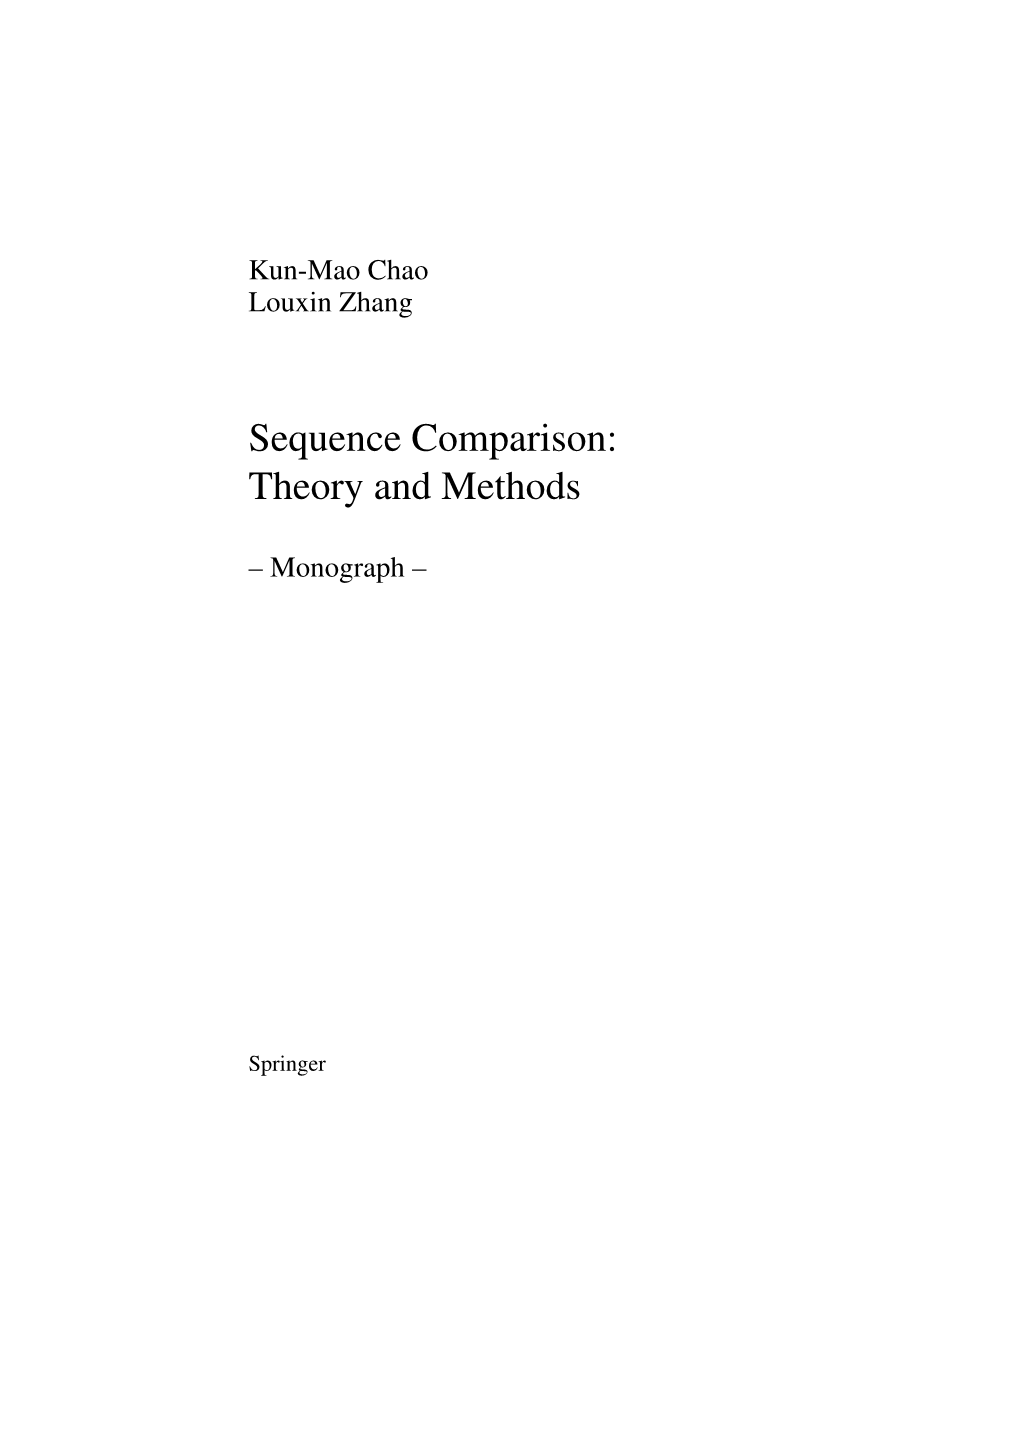 Sequence Comparison: Theory and Methods